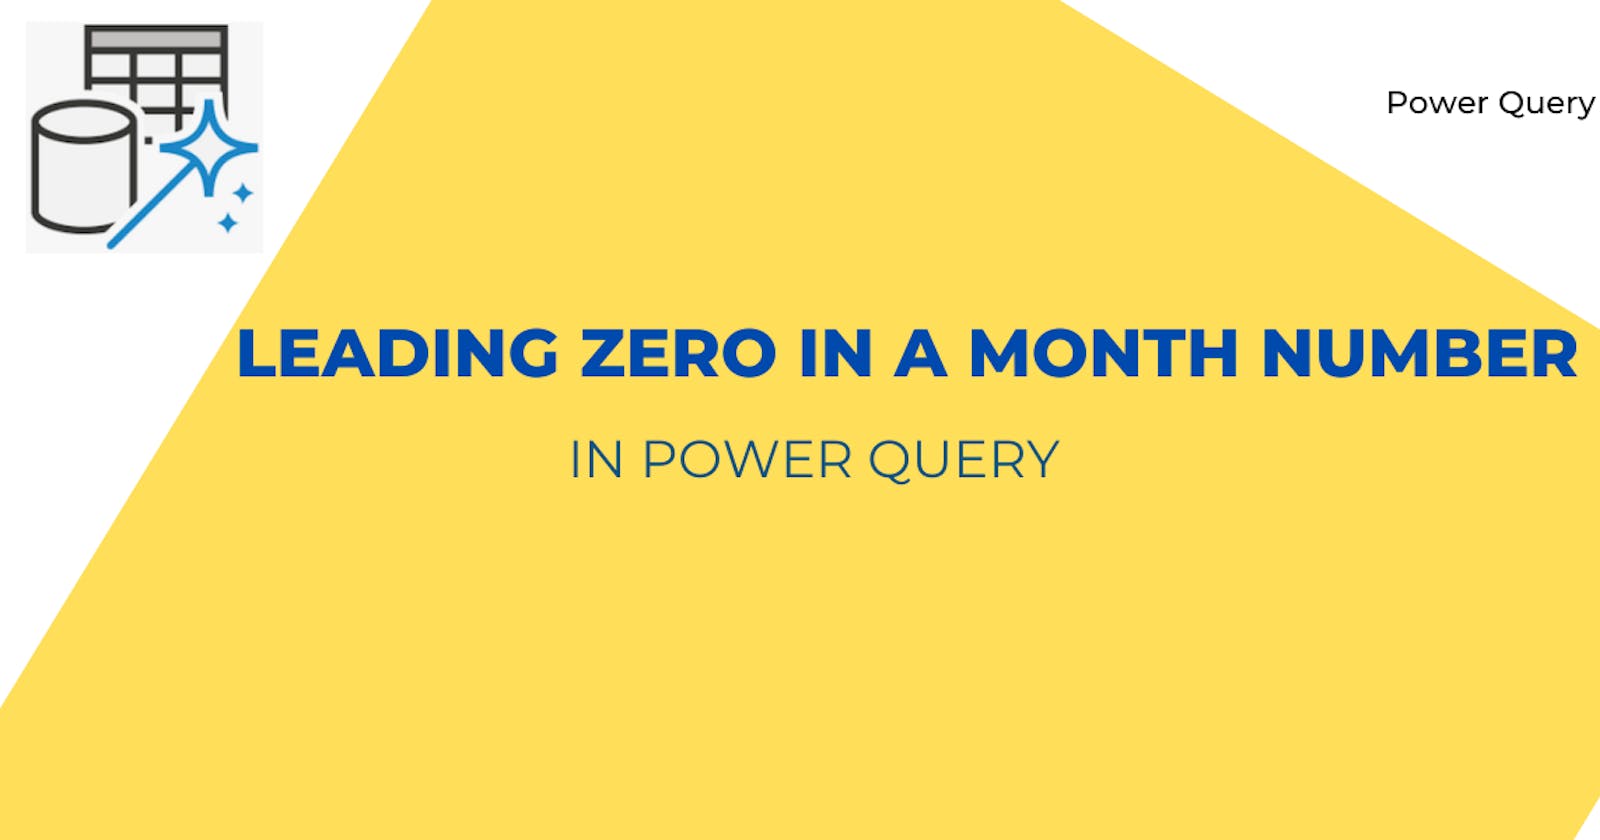 Leading Zero in a month number in Power Query